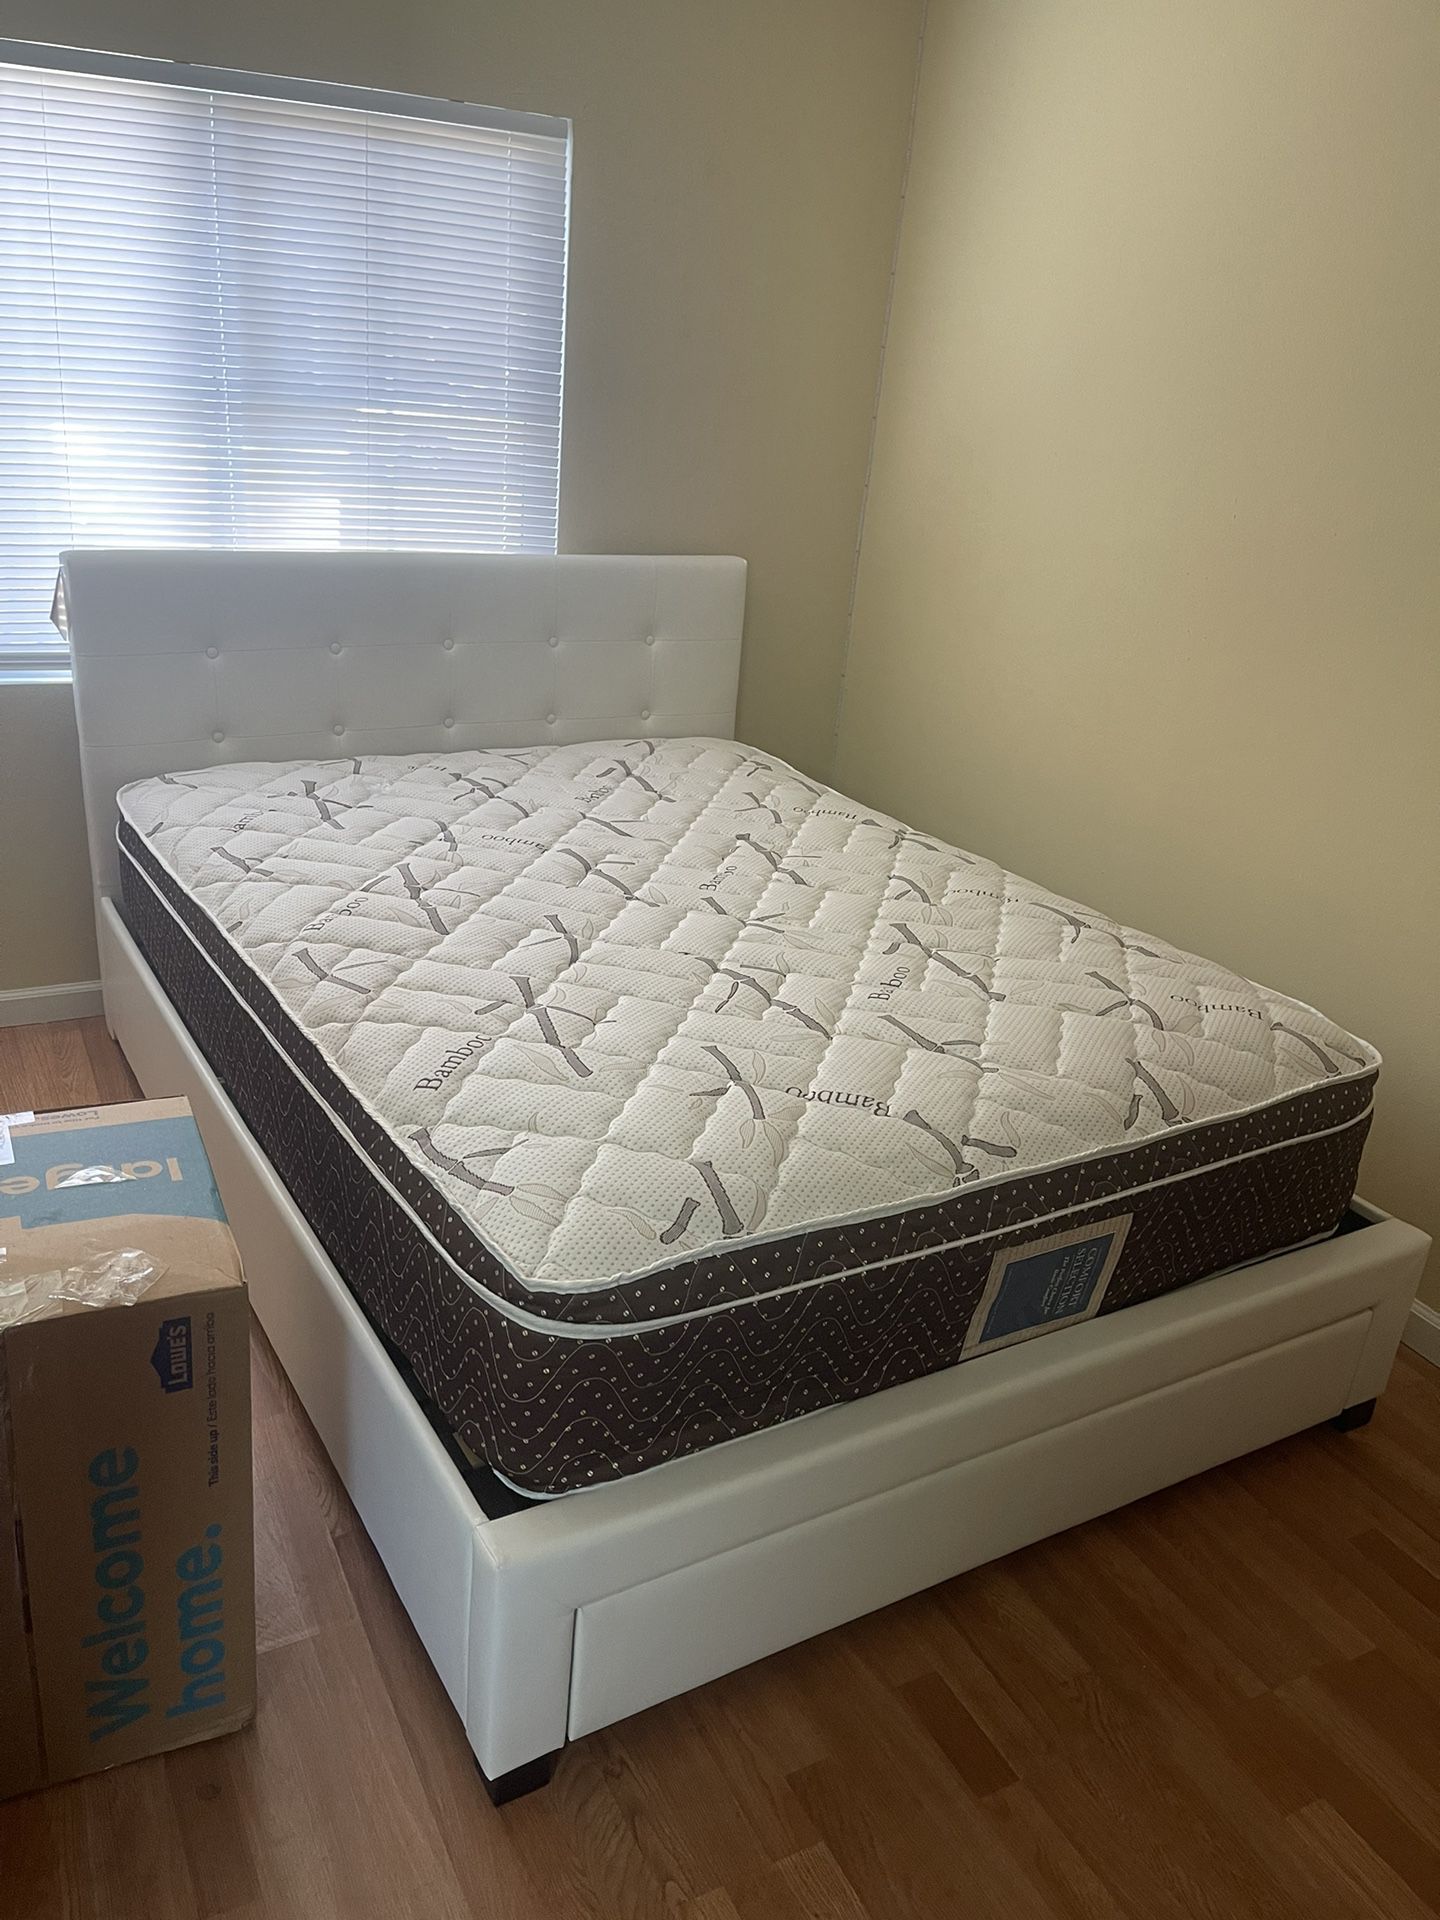 Queen Complete Bed With Pillow top Bamboo Mattress Only $400 Full Size $385